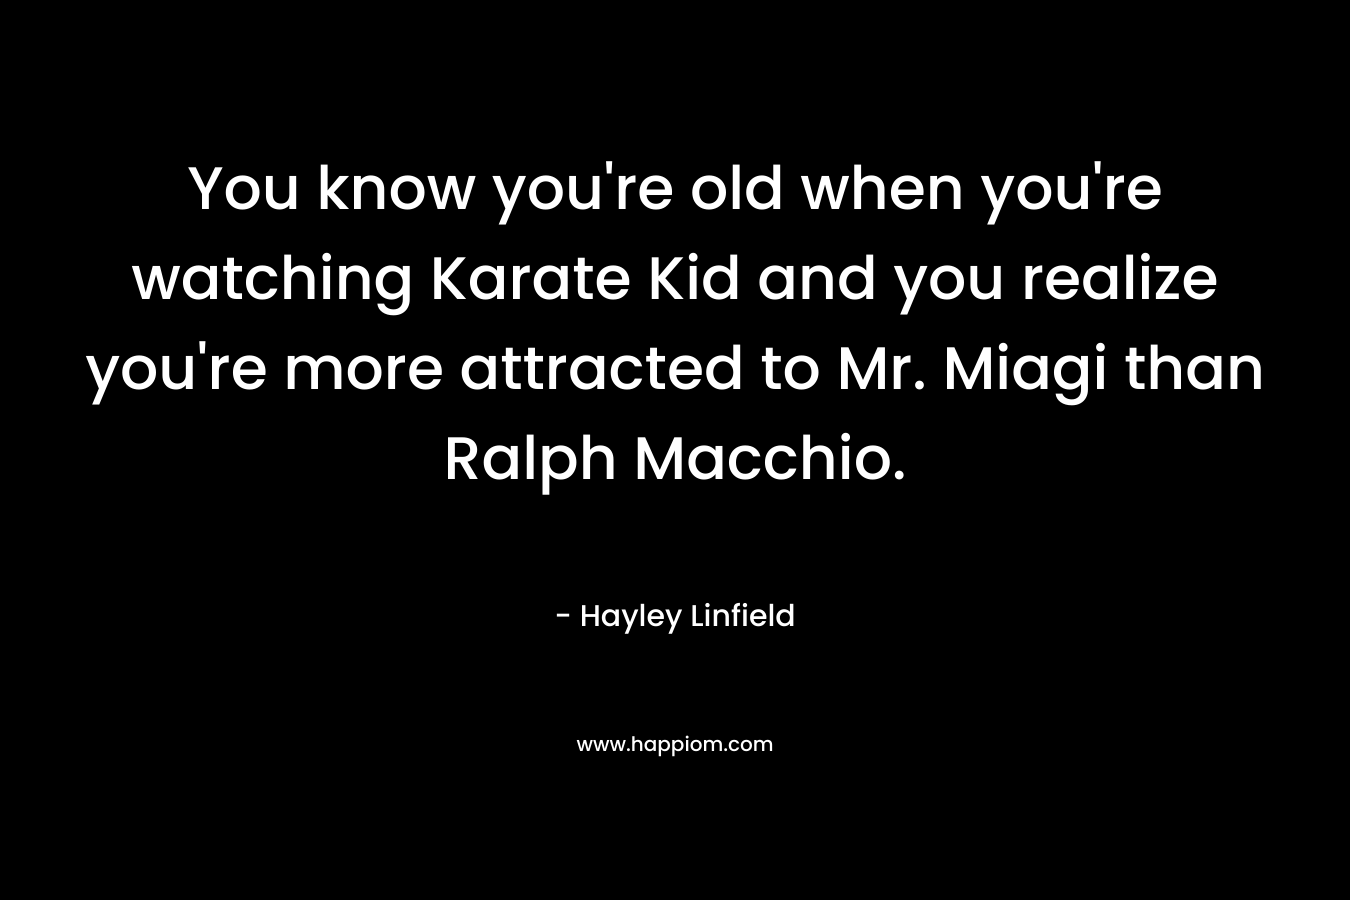 You know you're old when you're watching Karate Kid and you realize you're more attracted to Mr. Miagi than Ralph Macchio.